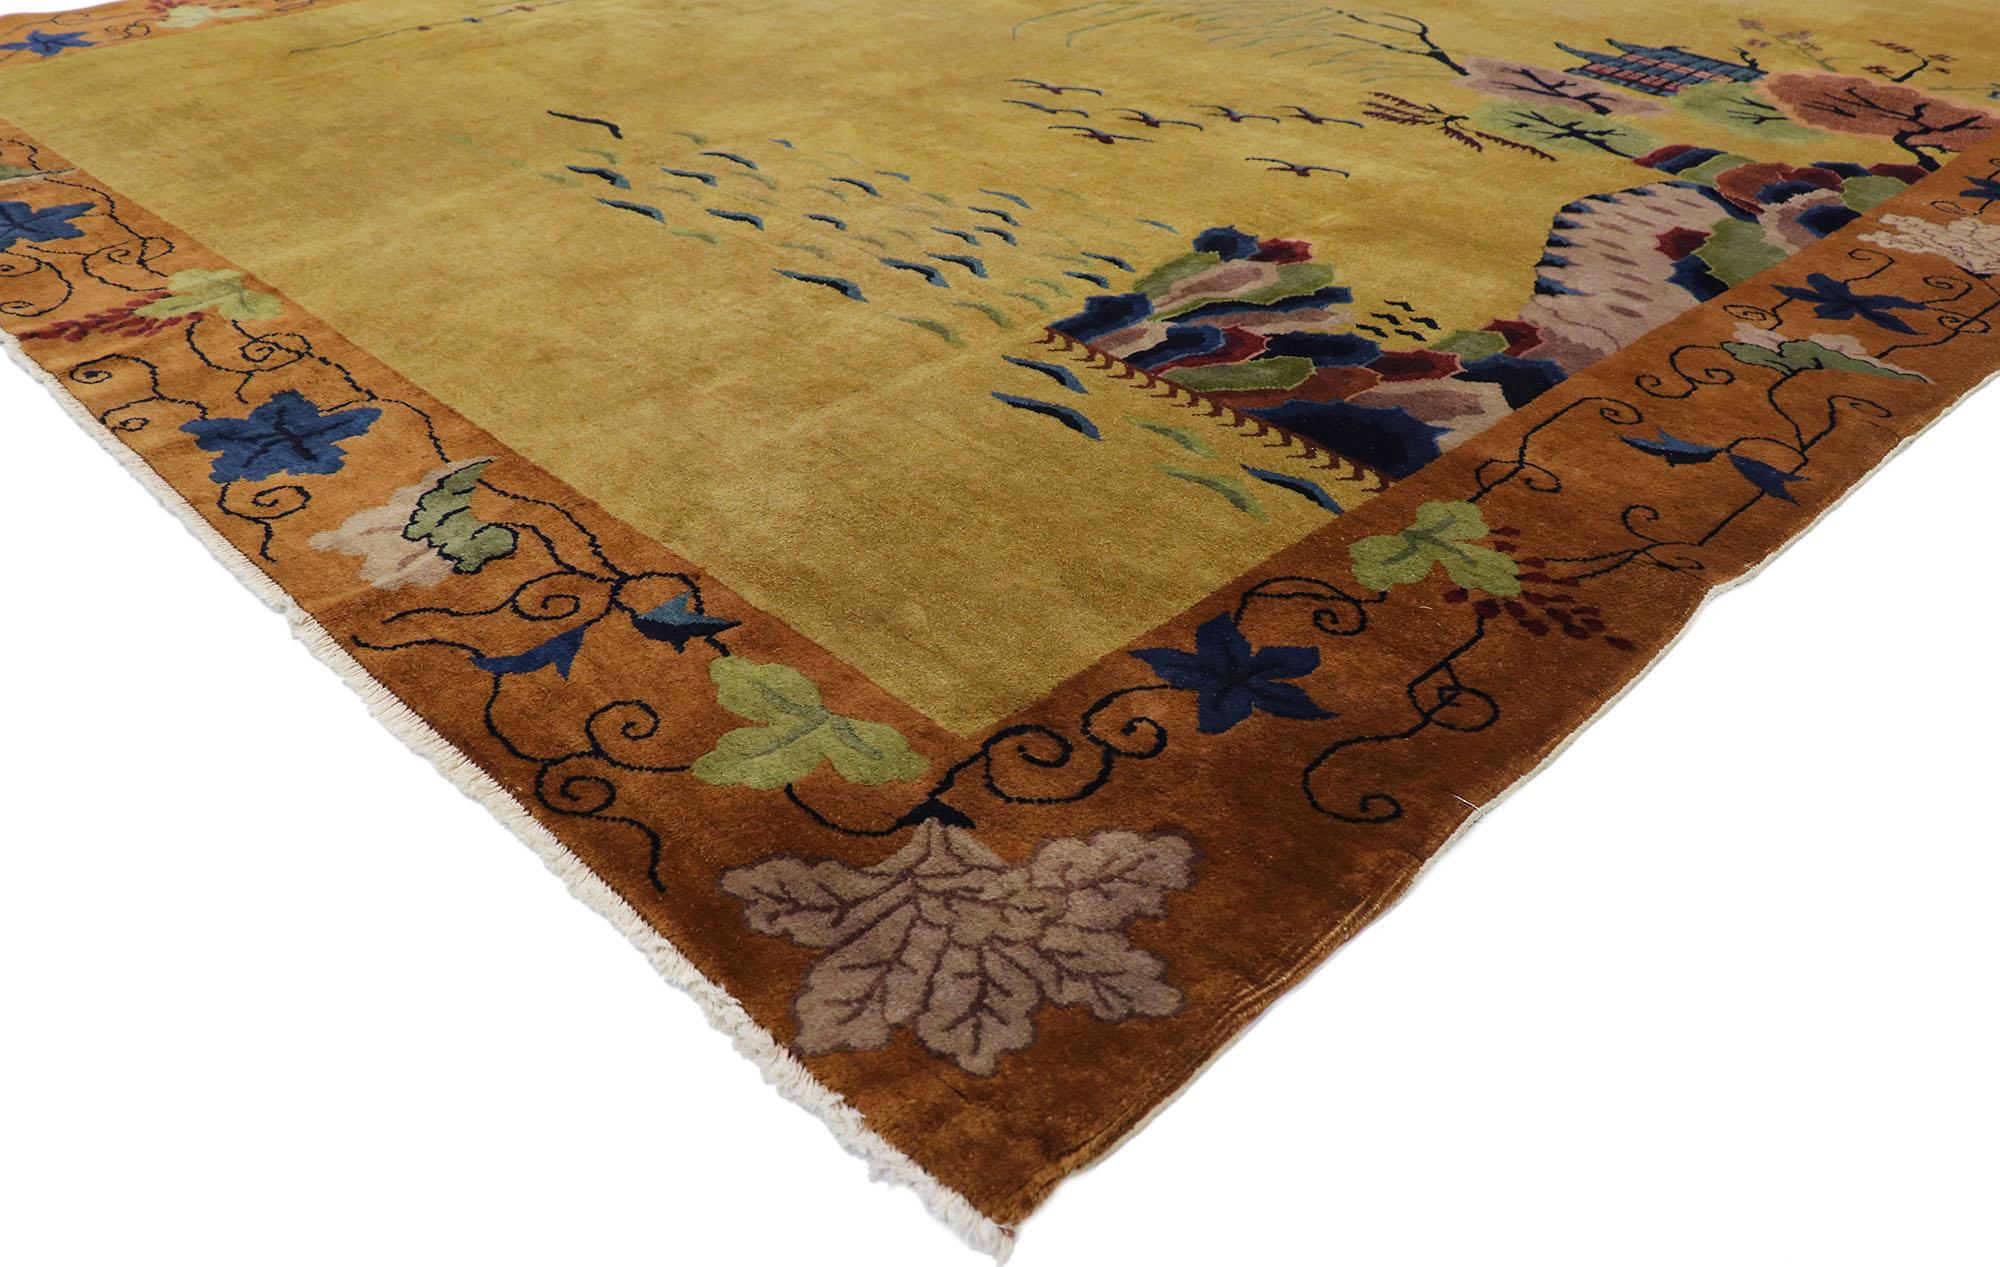 77625 Antique Chinese Art Deco Pictorial rug with Qing Dynasty style. This hand knotted wool antique Chinese Art Deco rug features a color-blocked field and border scheme festooned with glorious sprays of flowers and a striking landscape scene